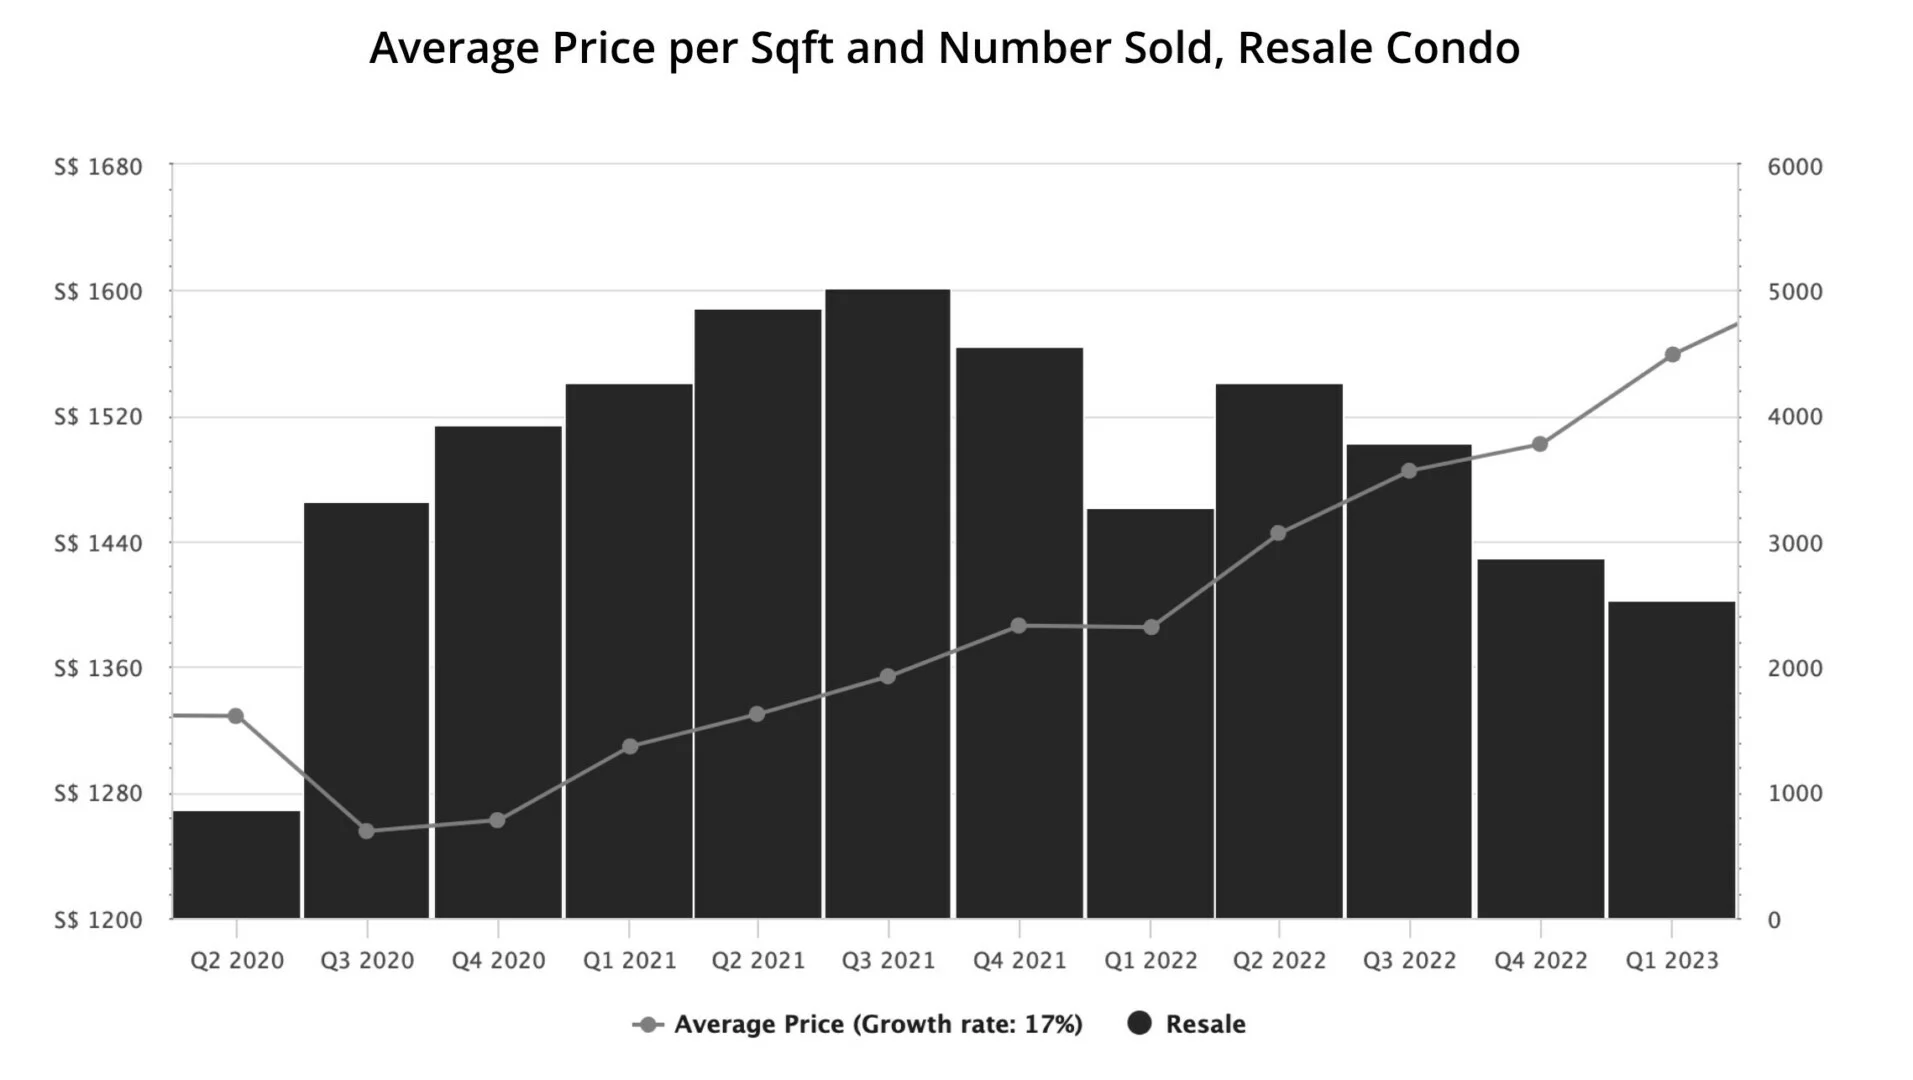 Graph of the average price per sqft and number sold for resale condo